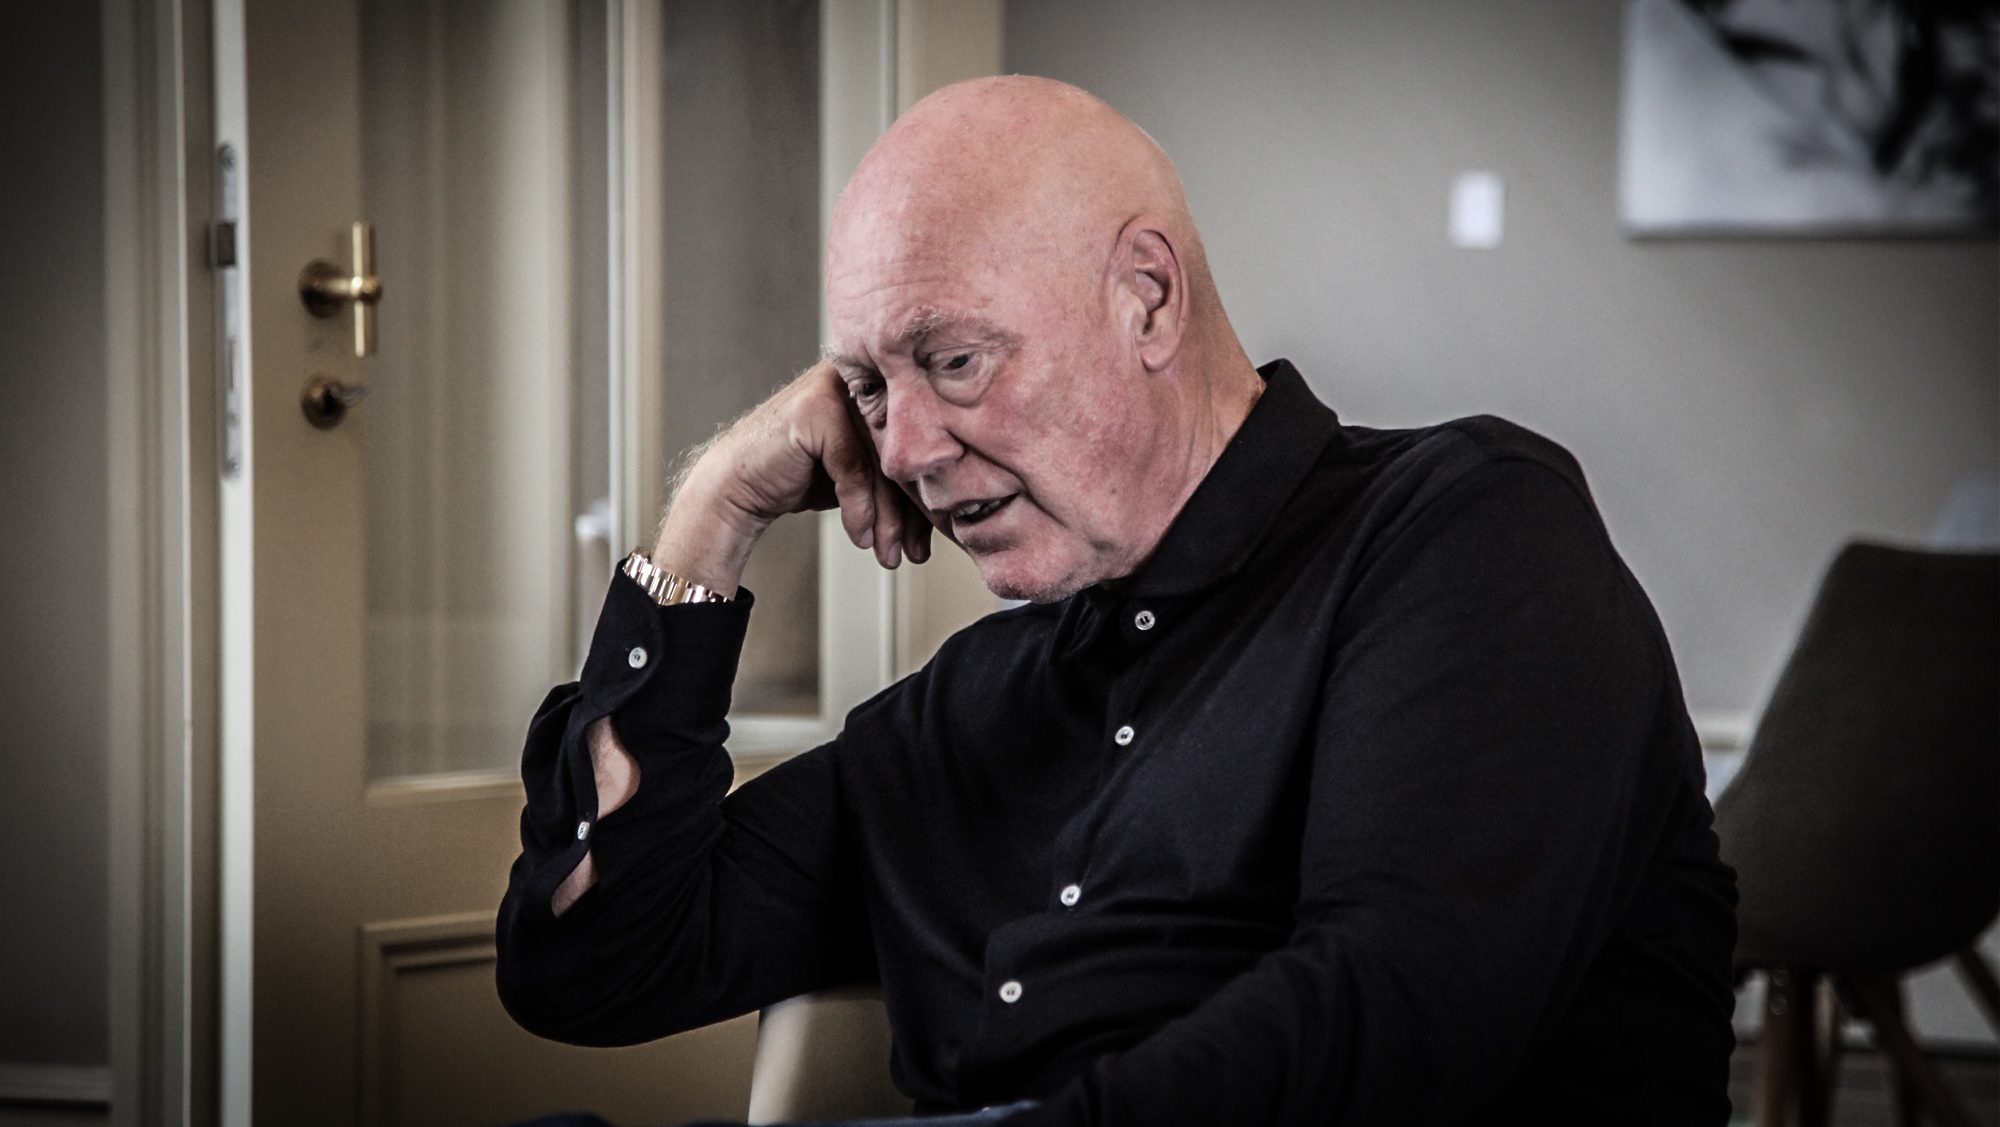 Interview - Jean-Claude Biver Reveals His Plans For JC Biver Watches